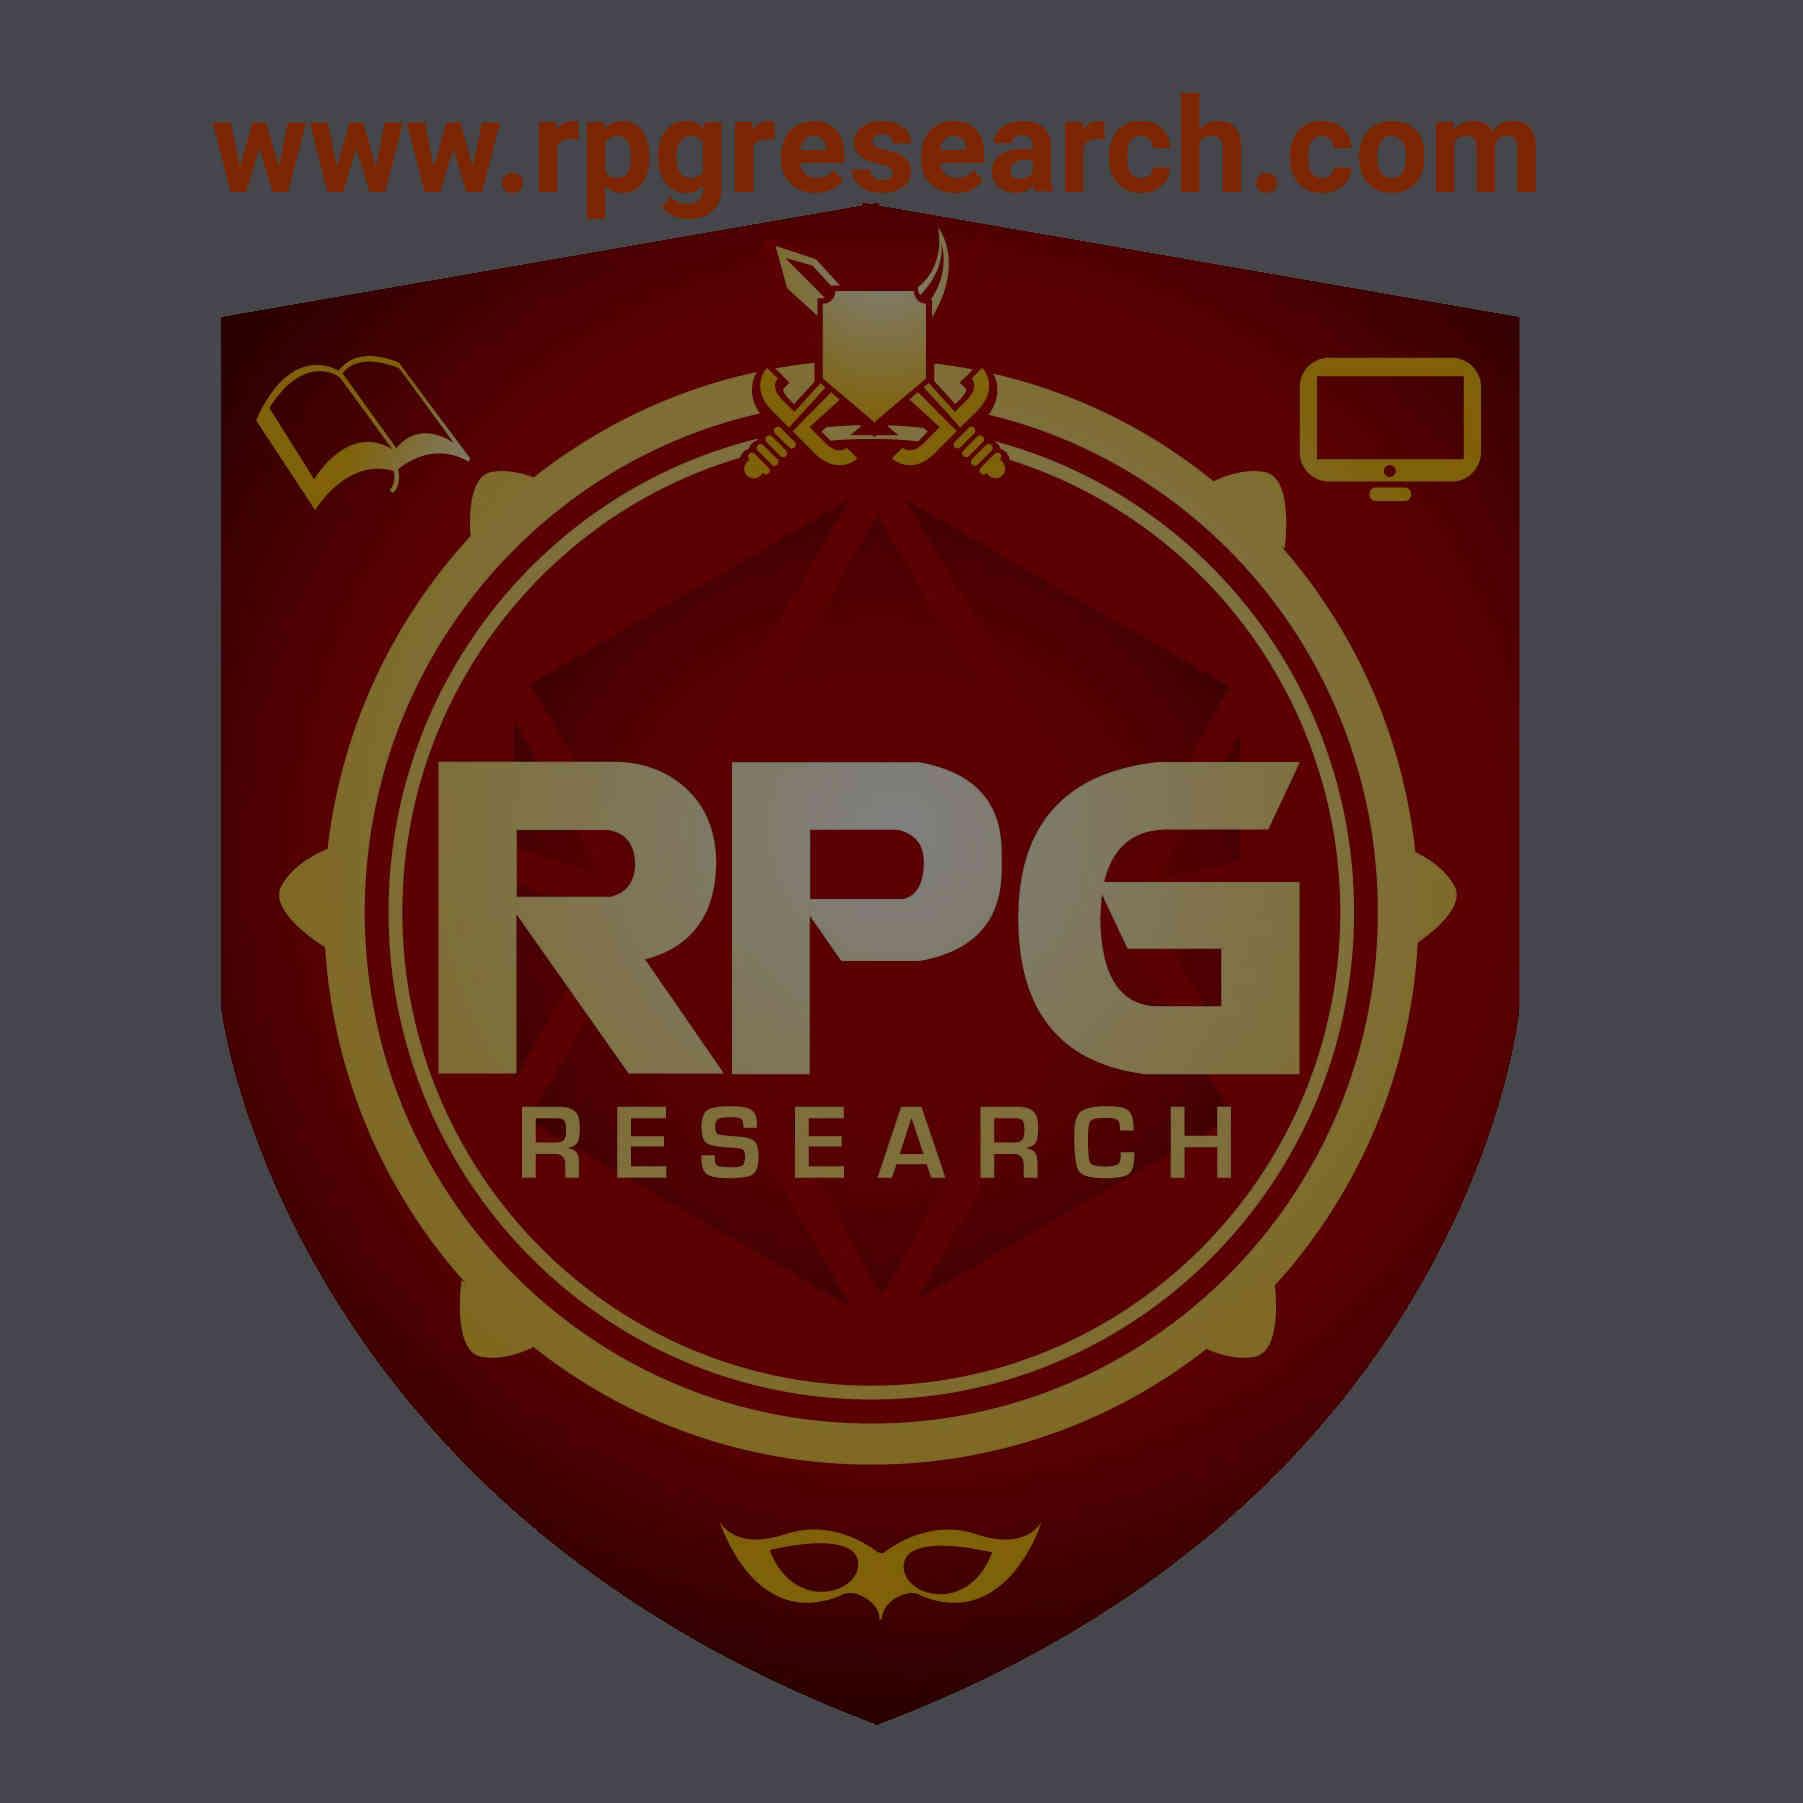 ABOUT RPG RESEARCH